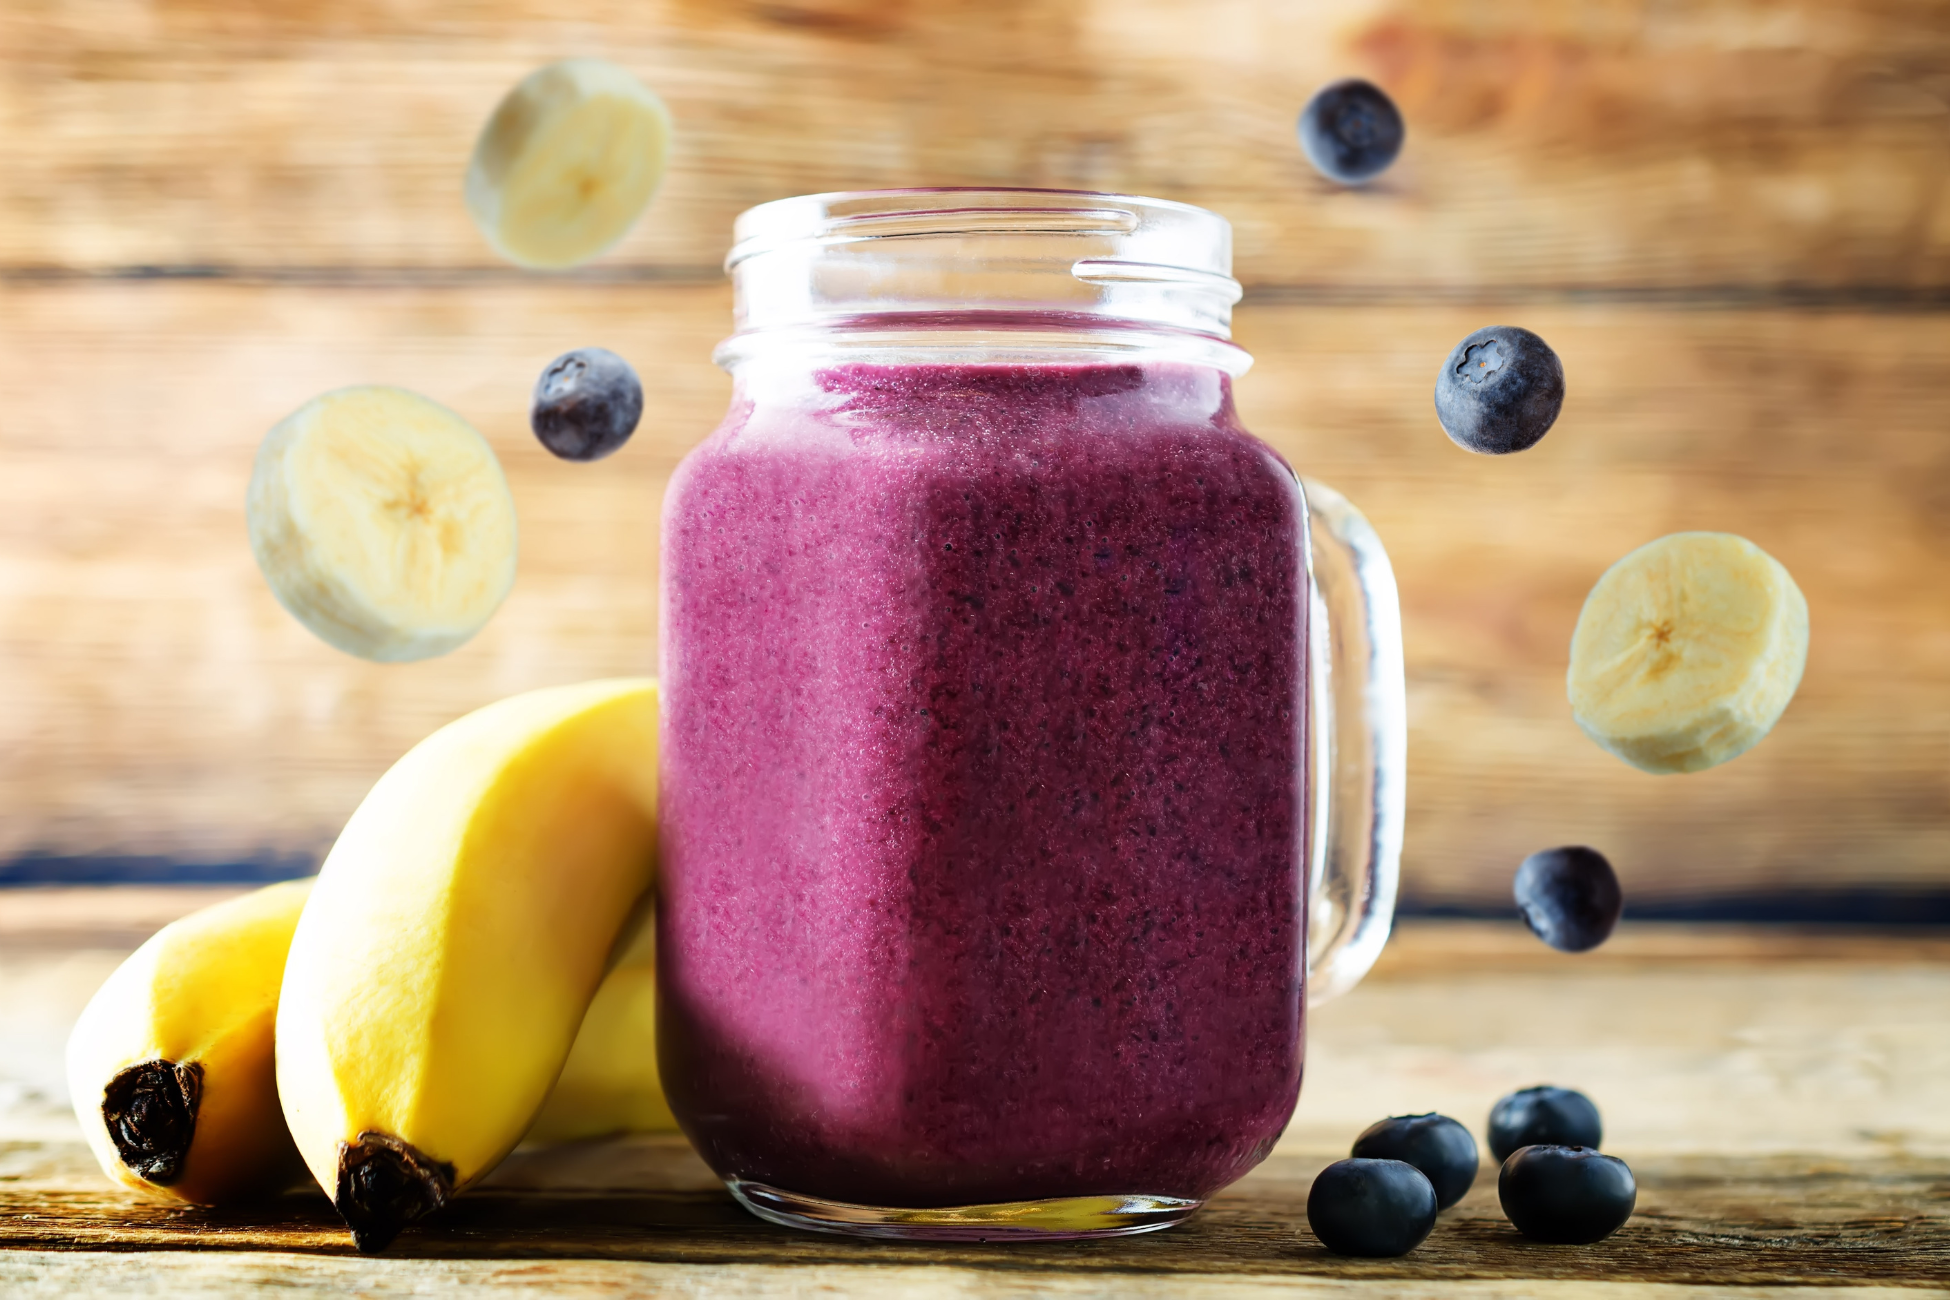 Berry Banana Smoothie Recipe: A Refreshing and Nutritious Drink for Any Time of Day